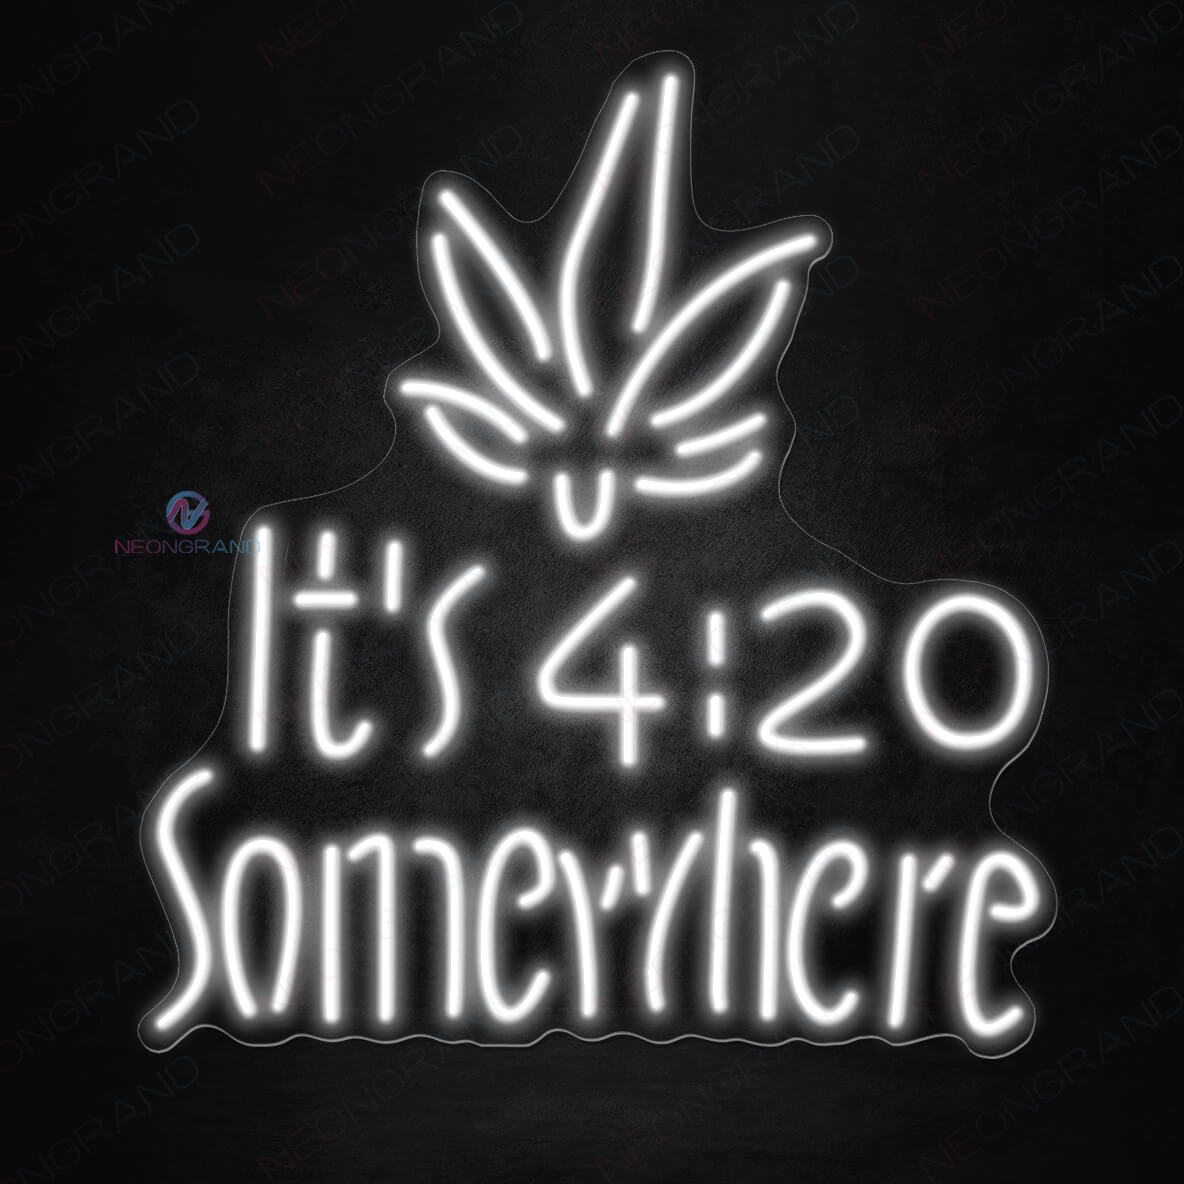 Its 420 Somewhere Neon Sign Weed Led Light white